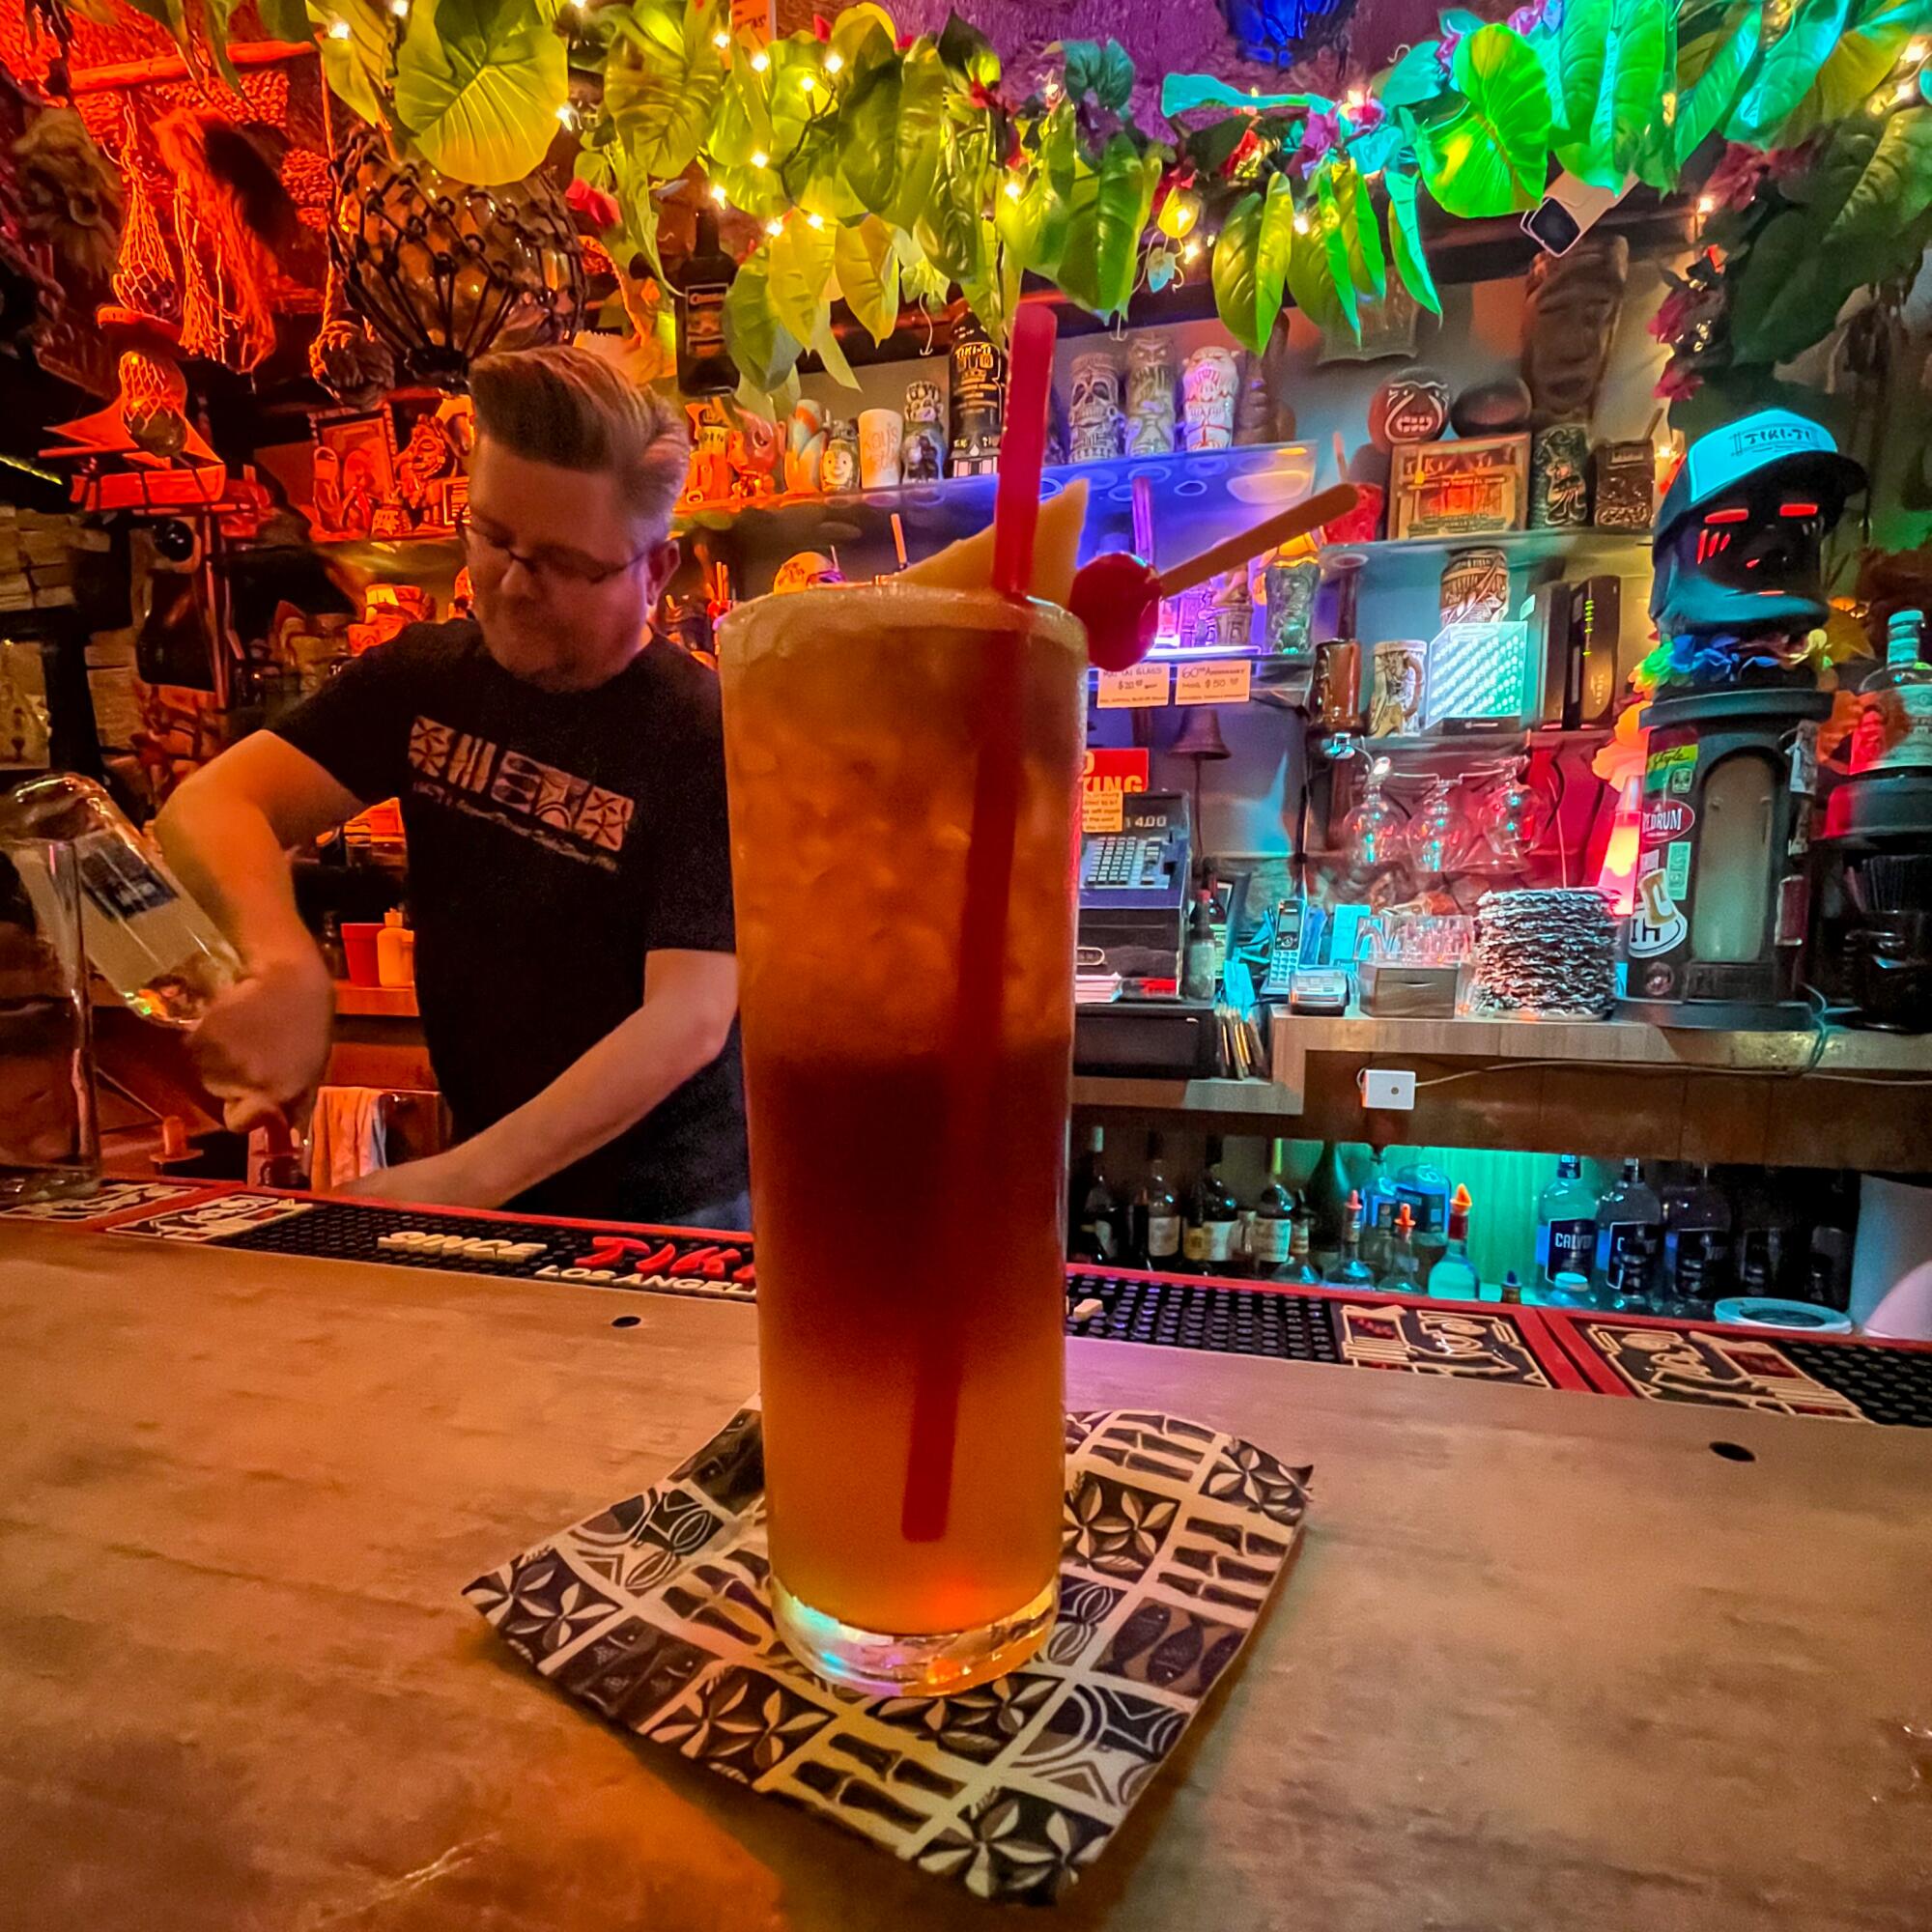 A bartender makes a drink at Tiki-Ti while another drink is on the bar.